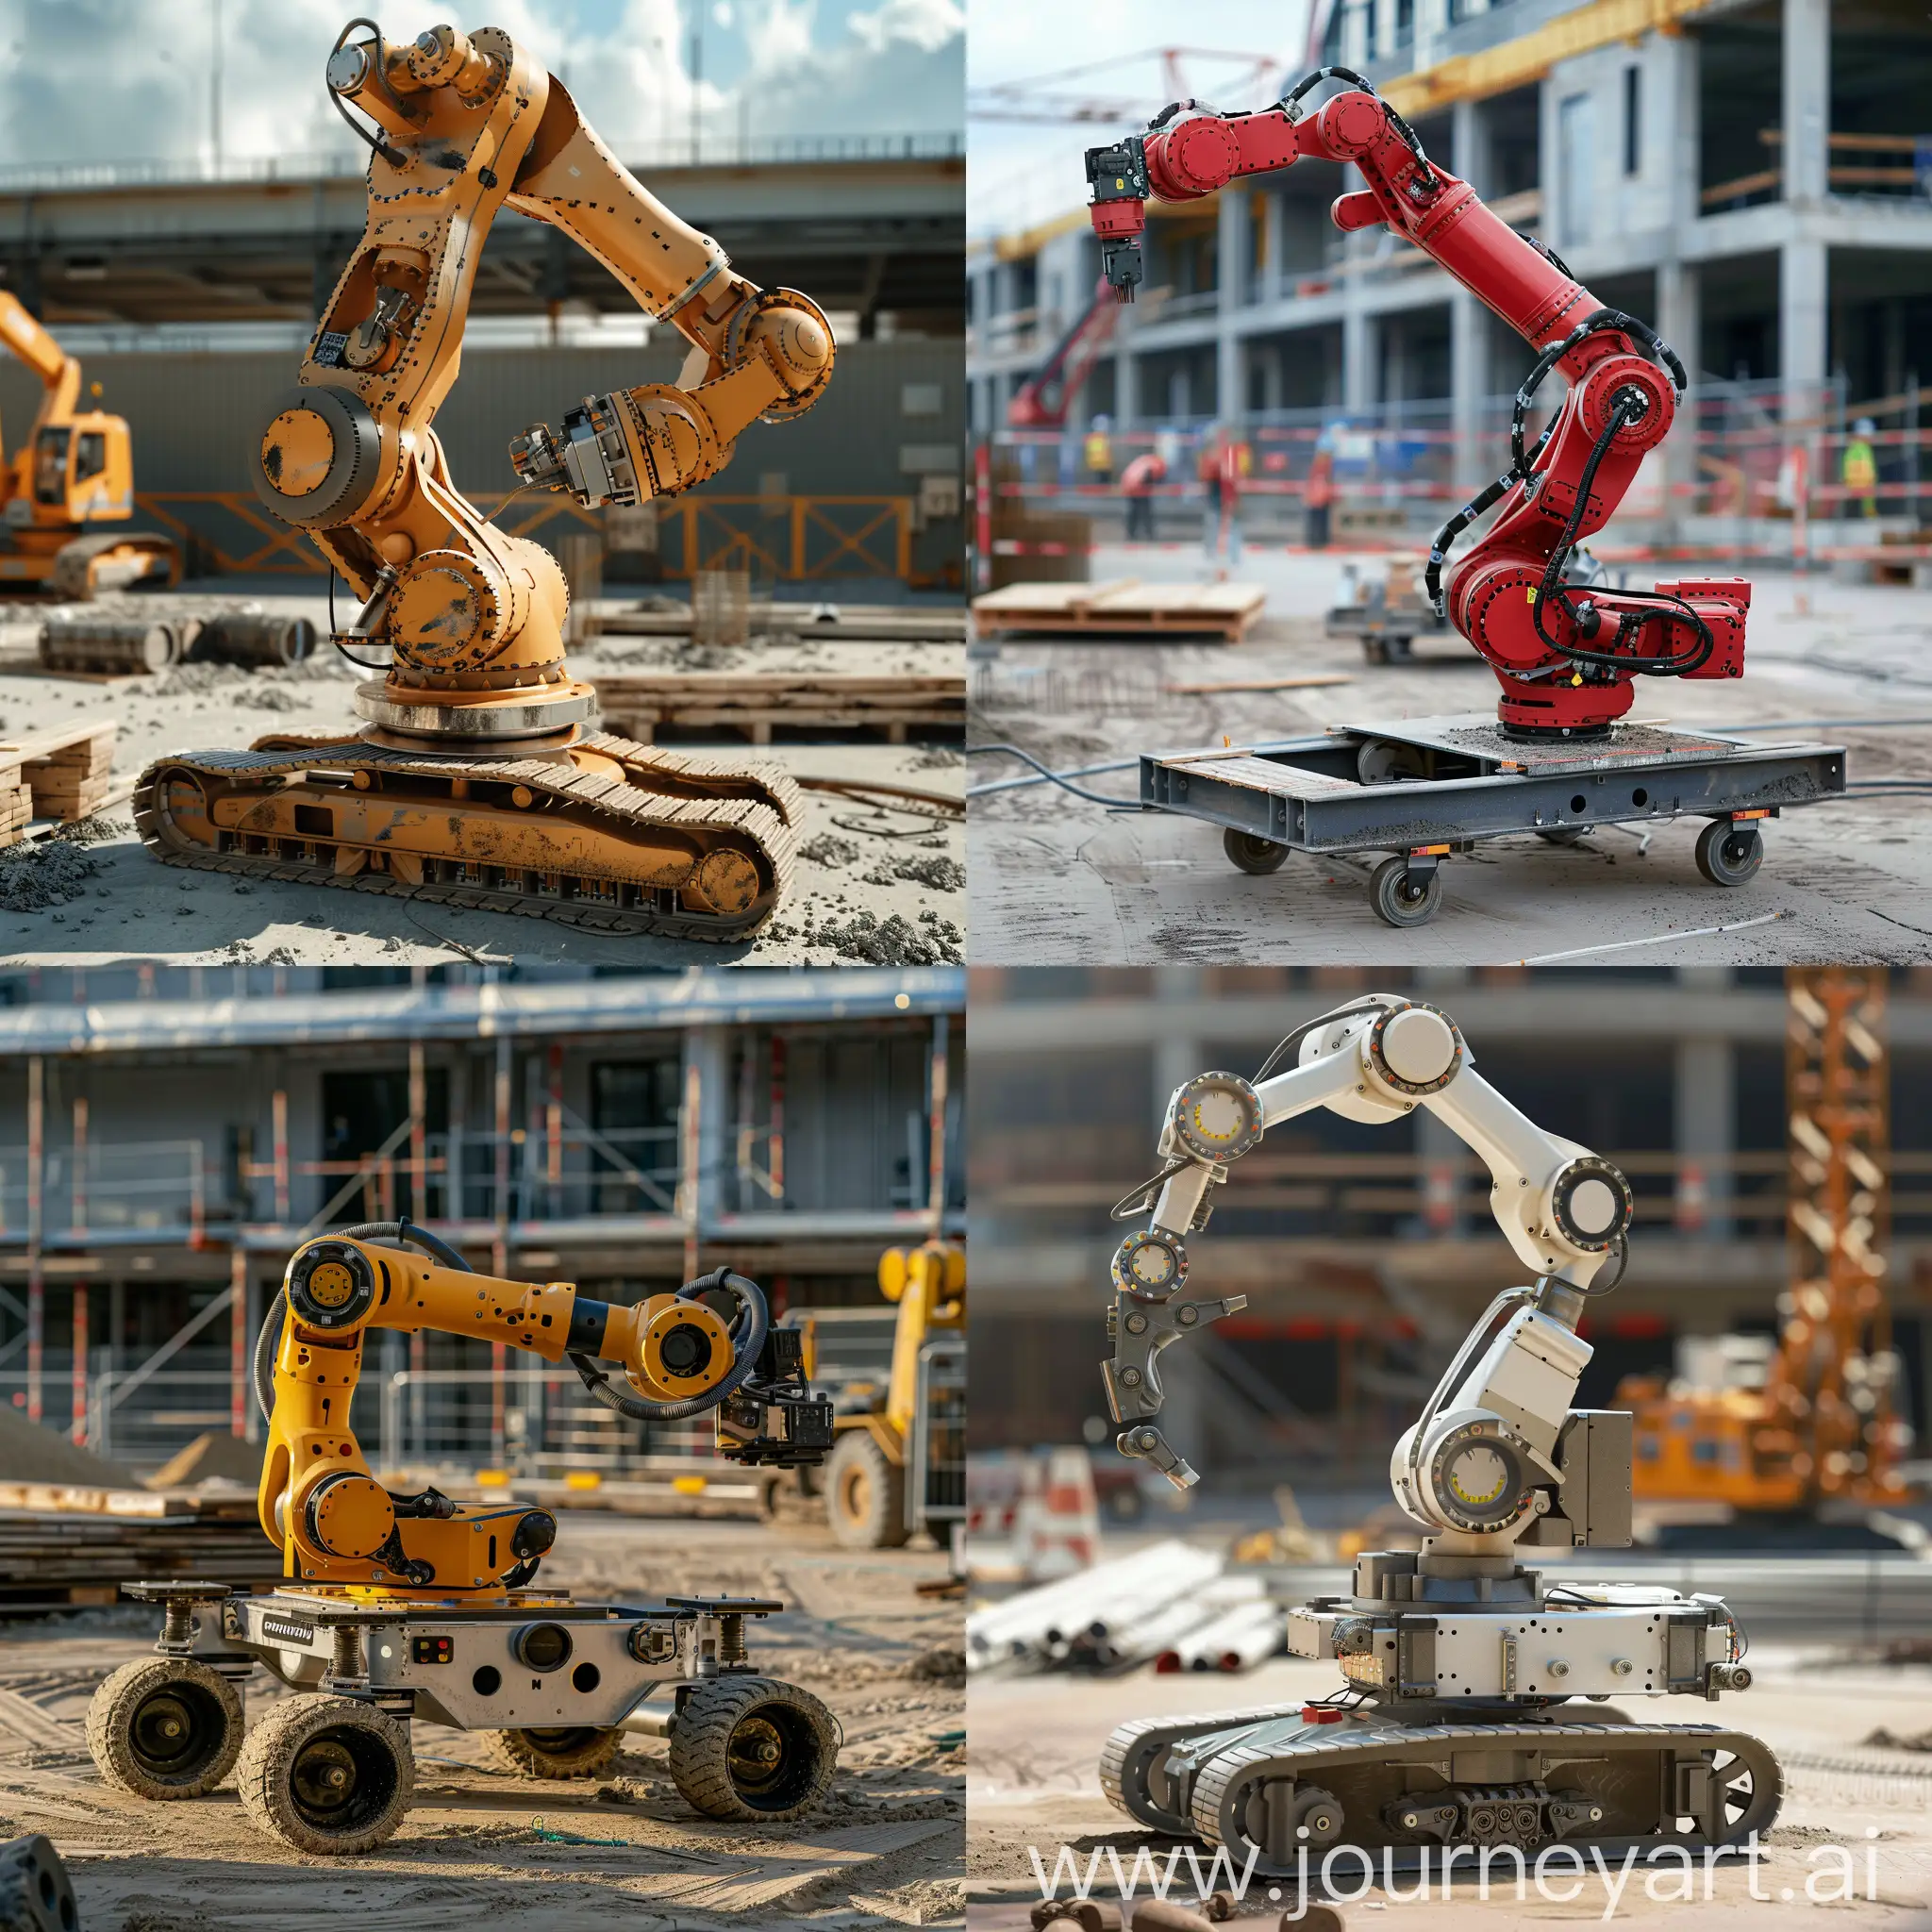 Industrial-Robot-on-Mobile-Base-Constructing-at-Construction-Site